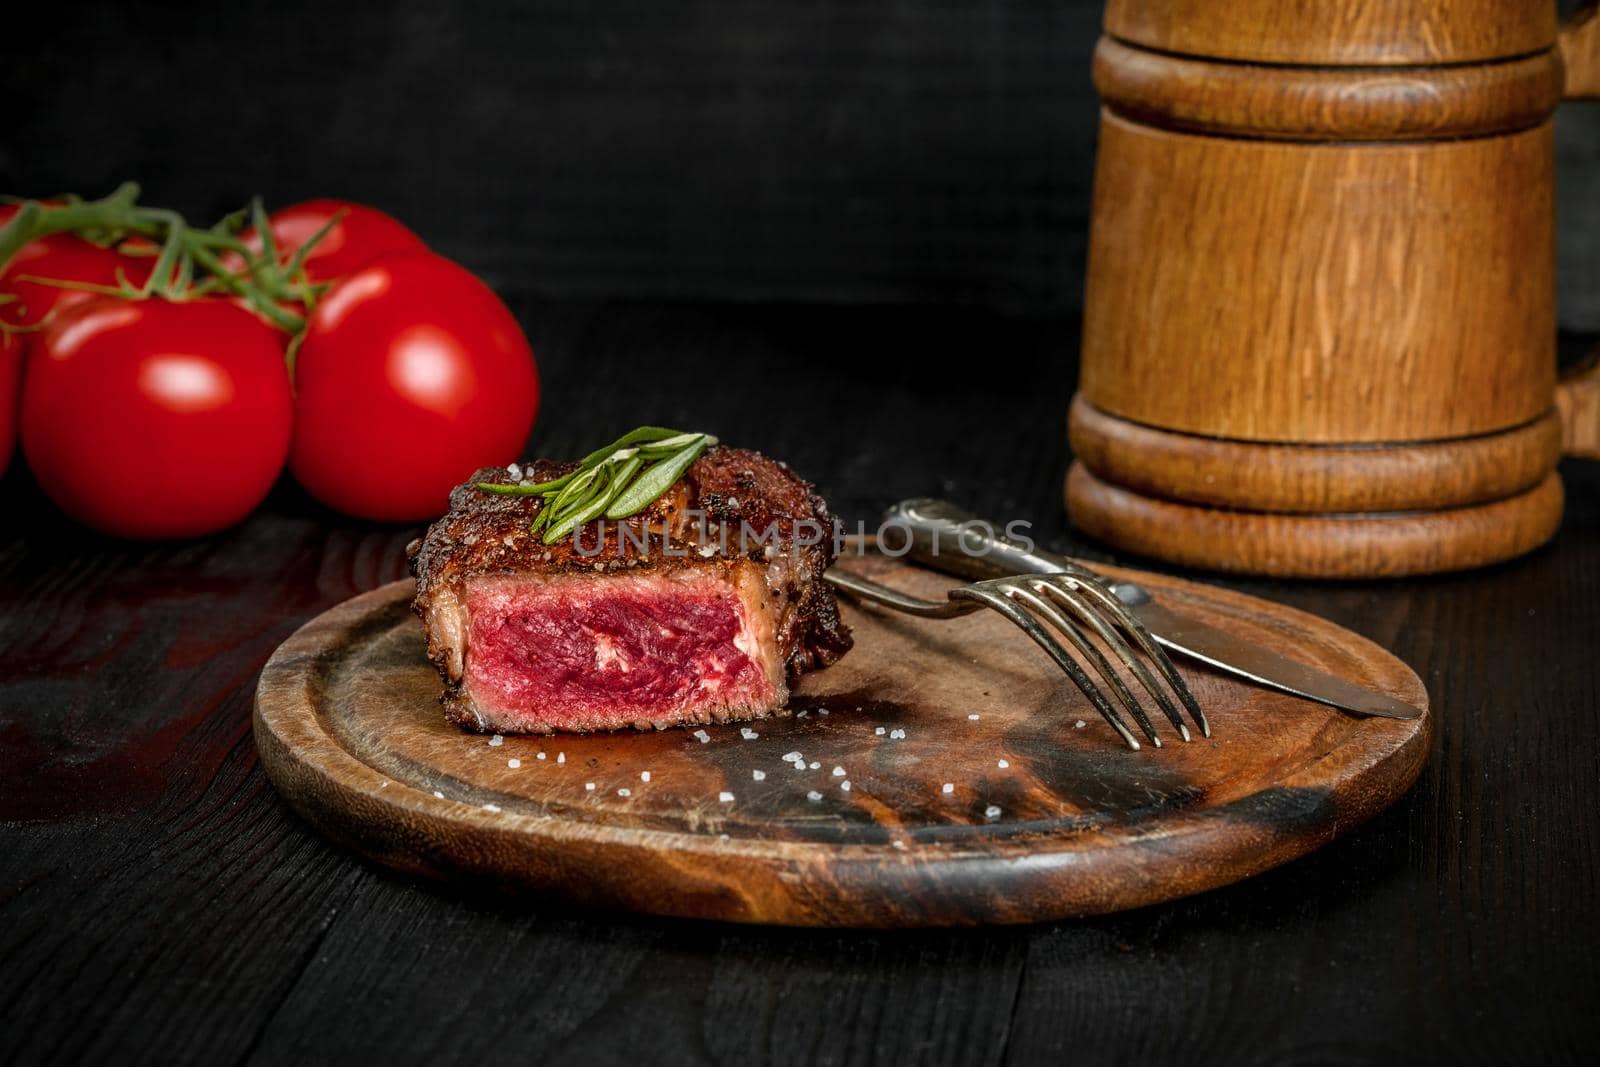 Grilled steak seasoned with spices and fresh herbs served on a wooden board with wooden mug of beer and fresh tomato. Black wooden background. Still life